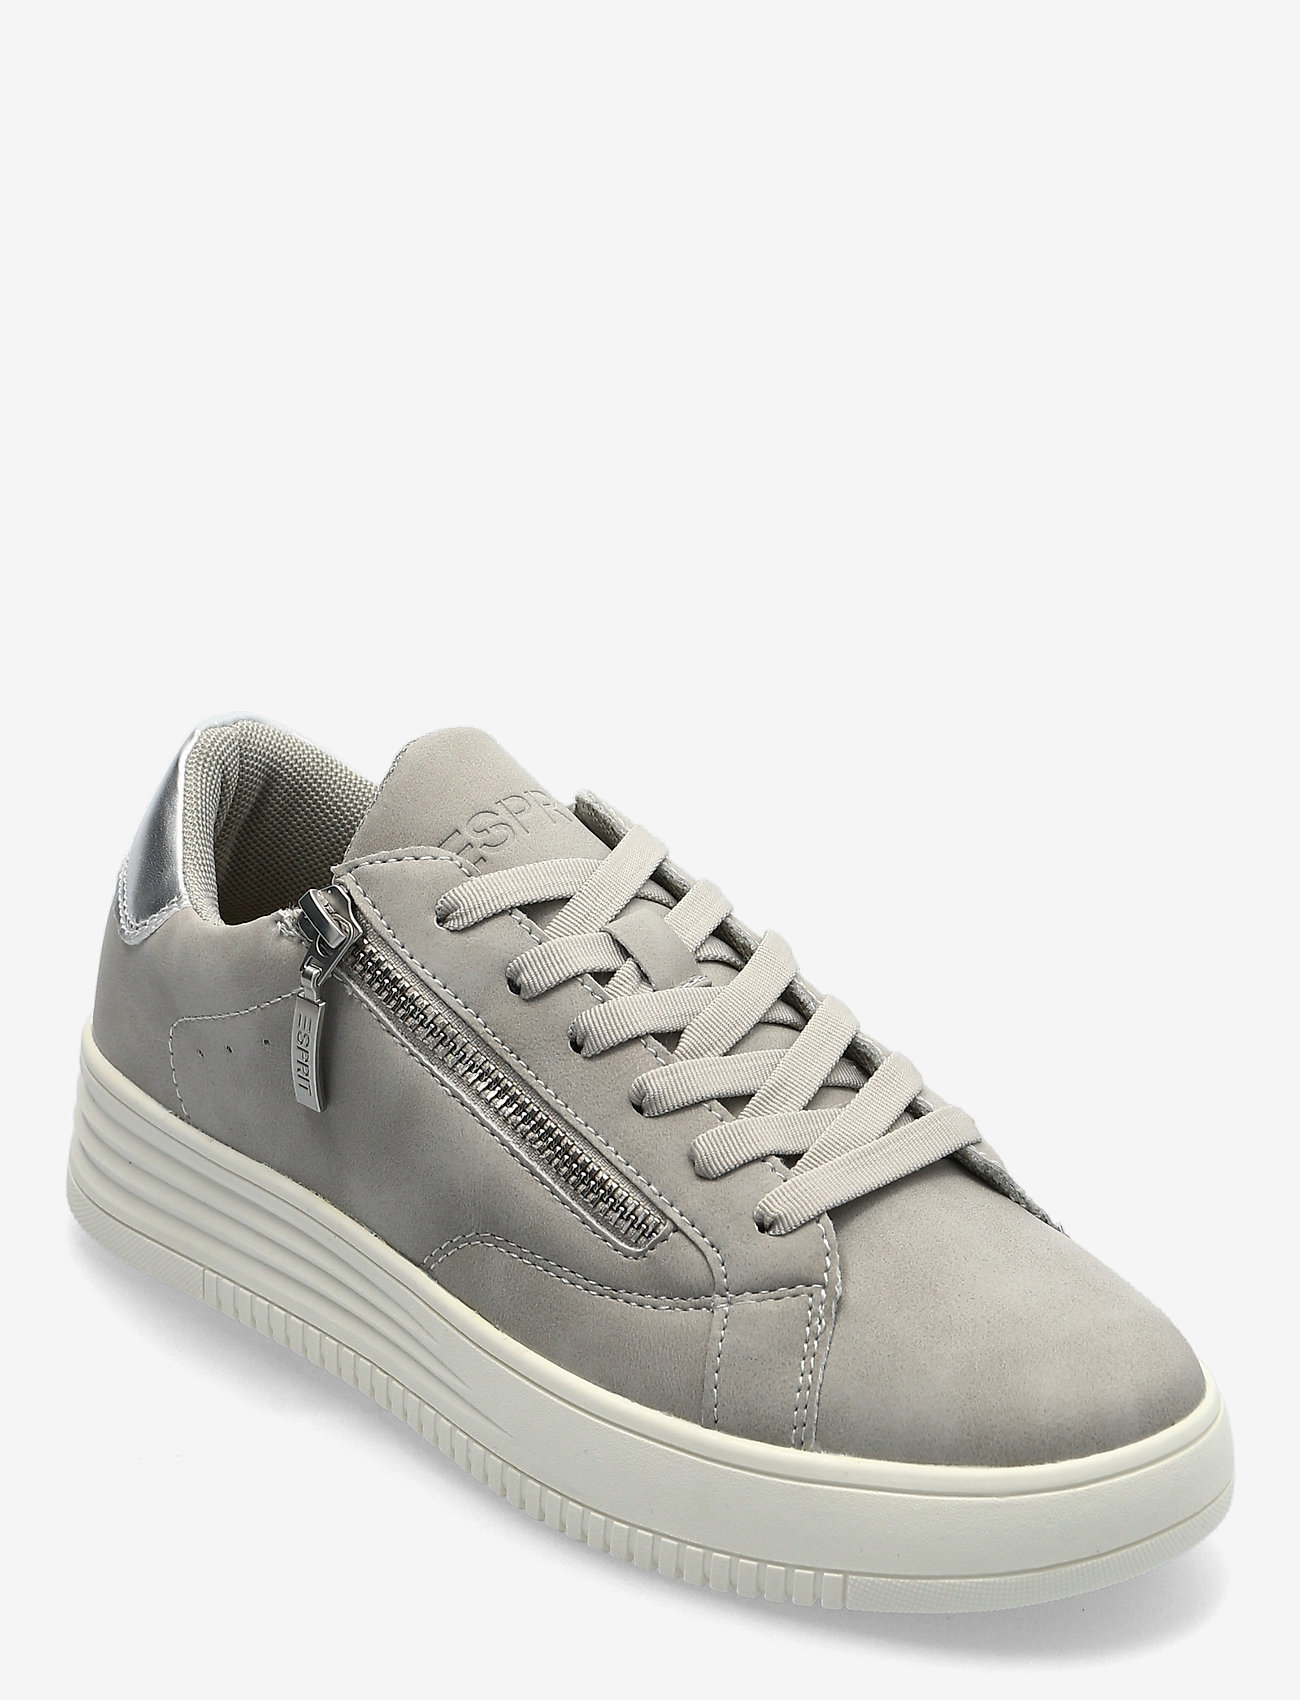 Esprit sneakers – Casual Shoes Others Low-top Casual til dame i Grå - Pashion.dk